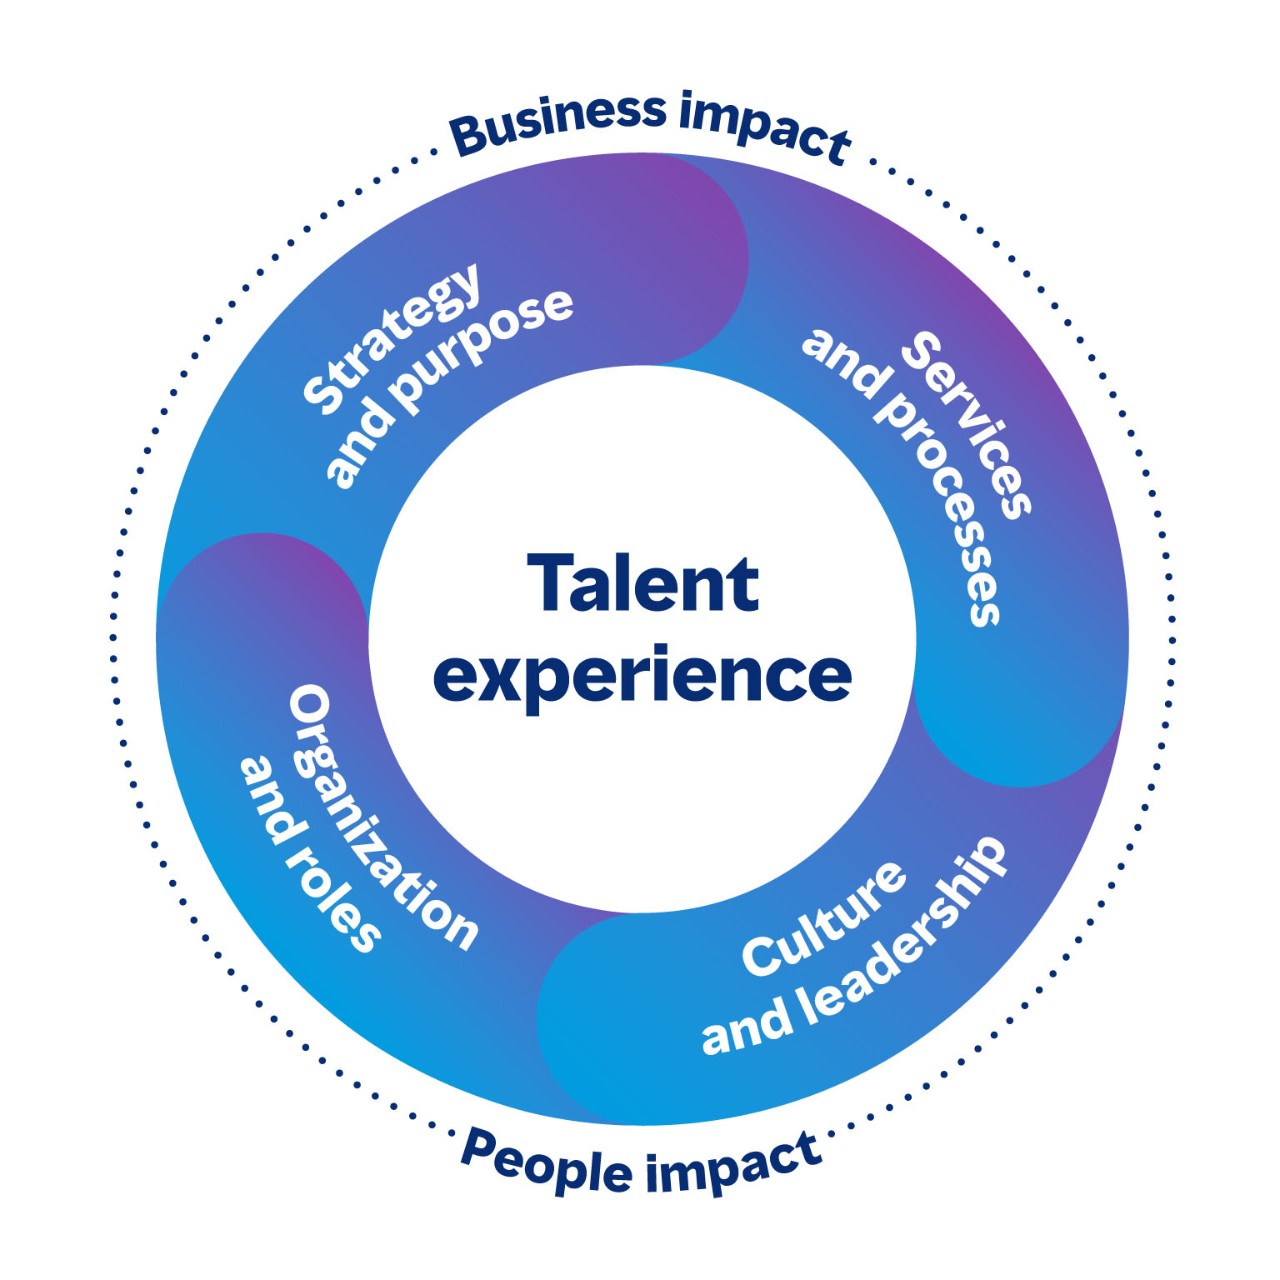 Circular image showing the connected areas of the talent experience that have both a business and people impact. The four areas are Strategy and purpose, Services and processes, Culture and leadership, and organisation and roles.